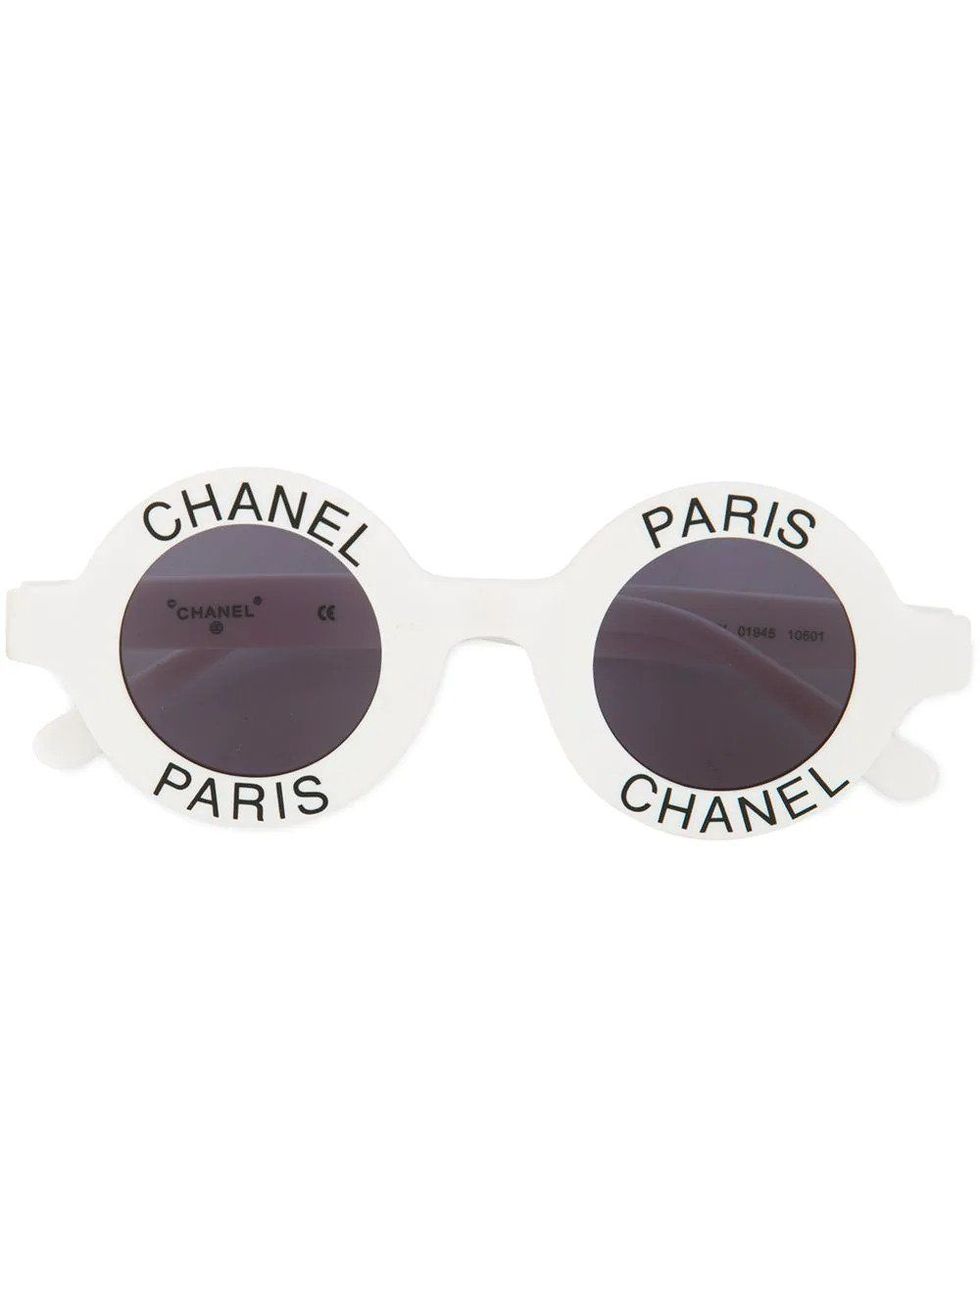 Mother Of Pearl Sunglasses - 20 For Sale on 1stDibs